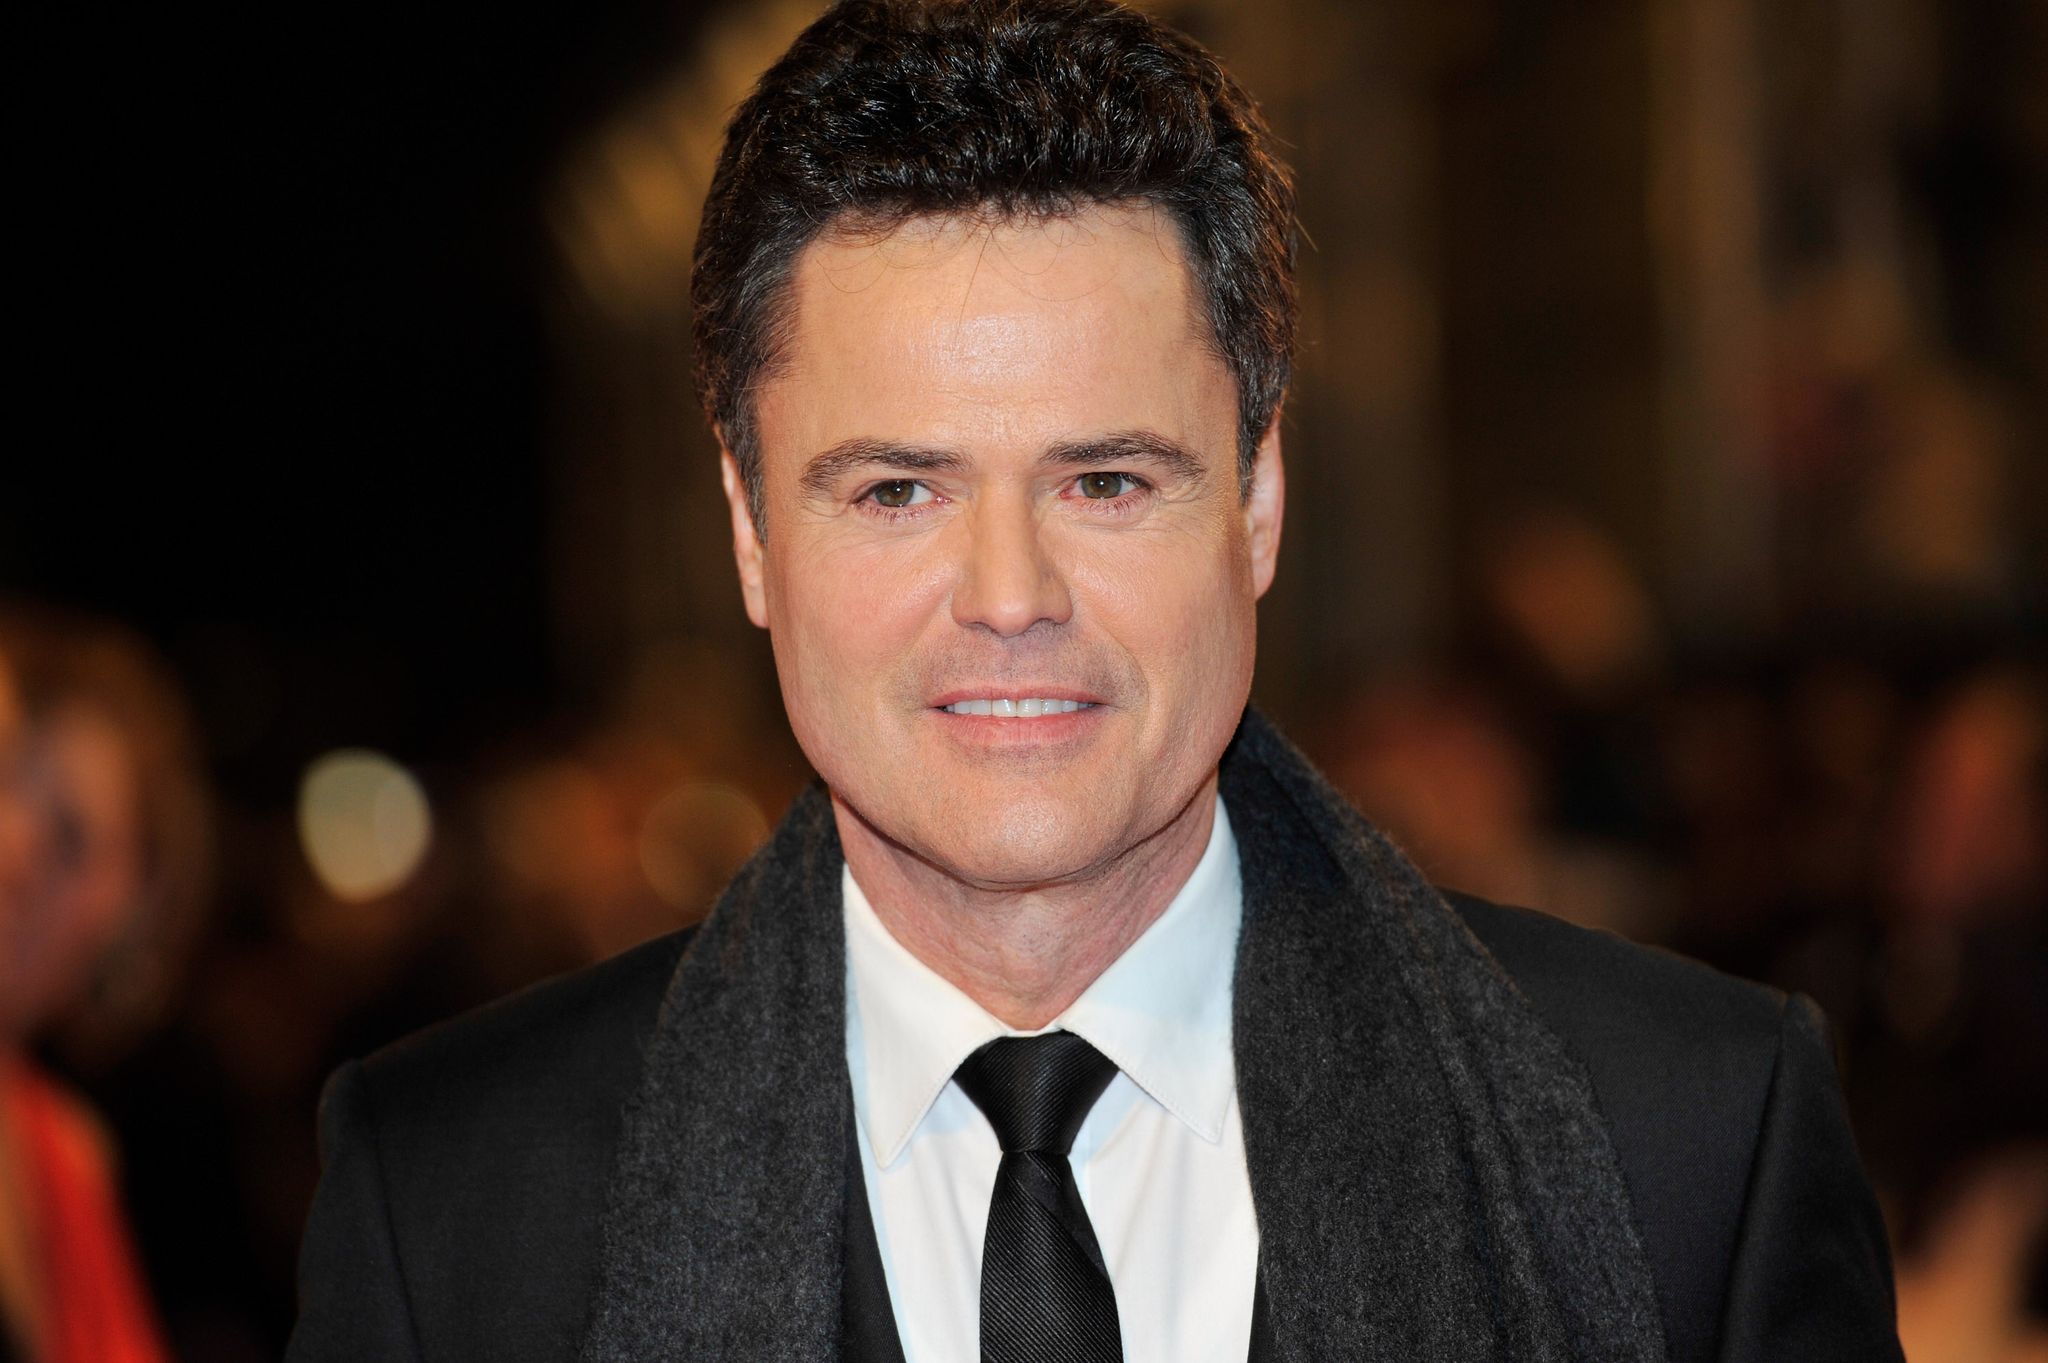 Donny Osmond at the the National Television Awards at 02 Arena on January 23, 2013 | Photo: Getty Images